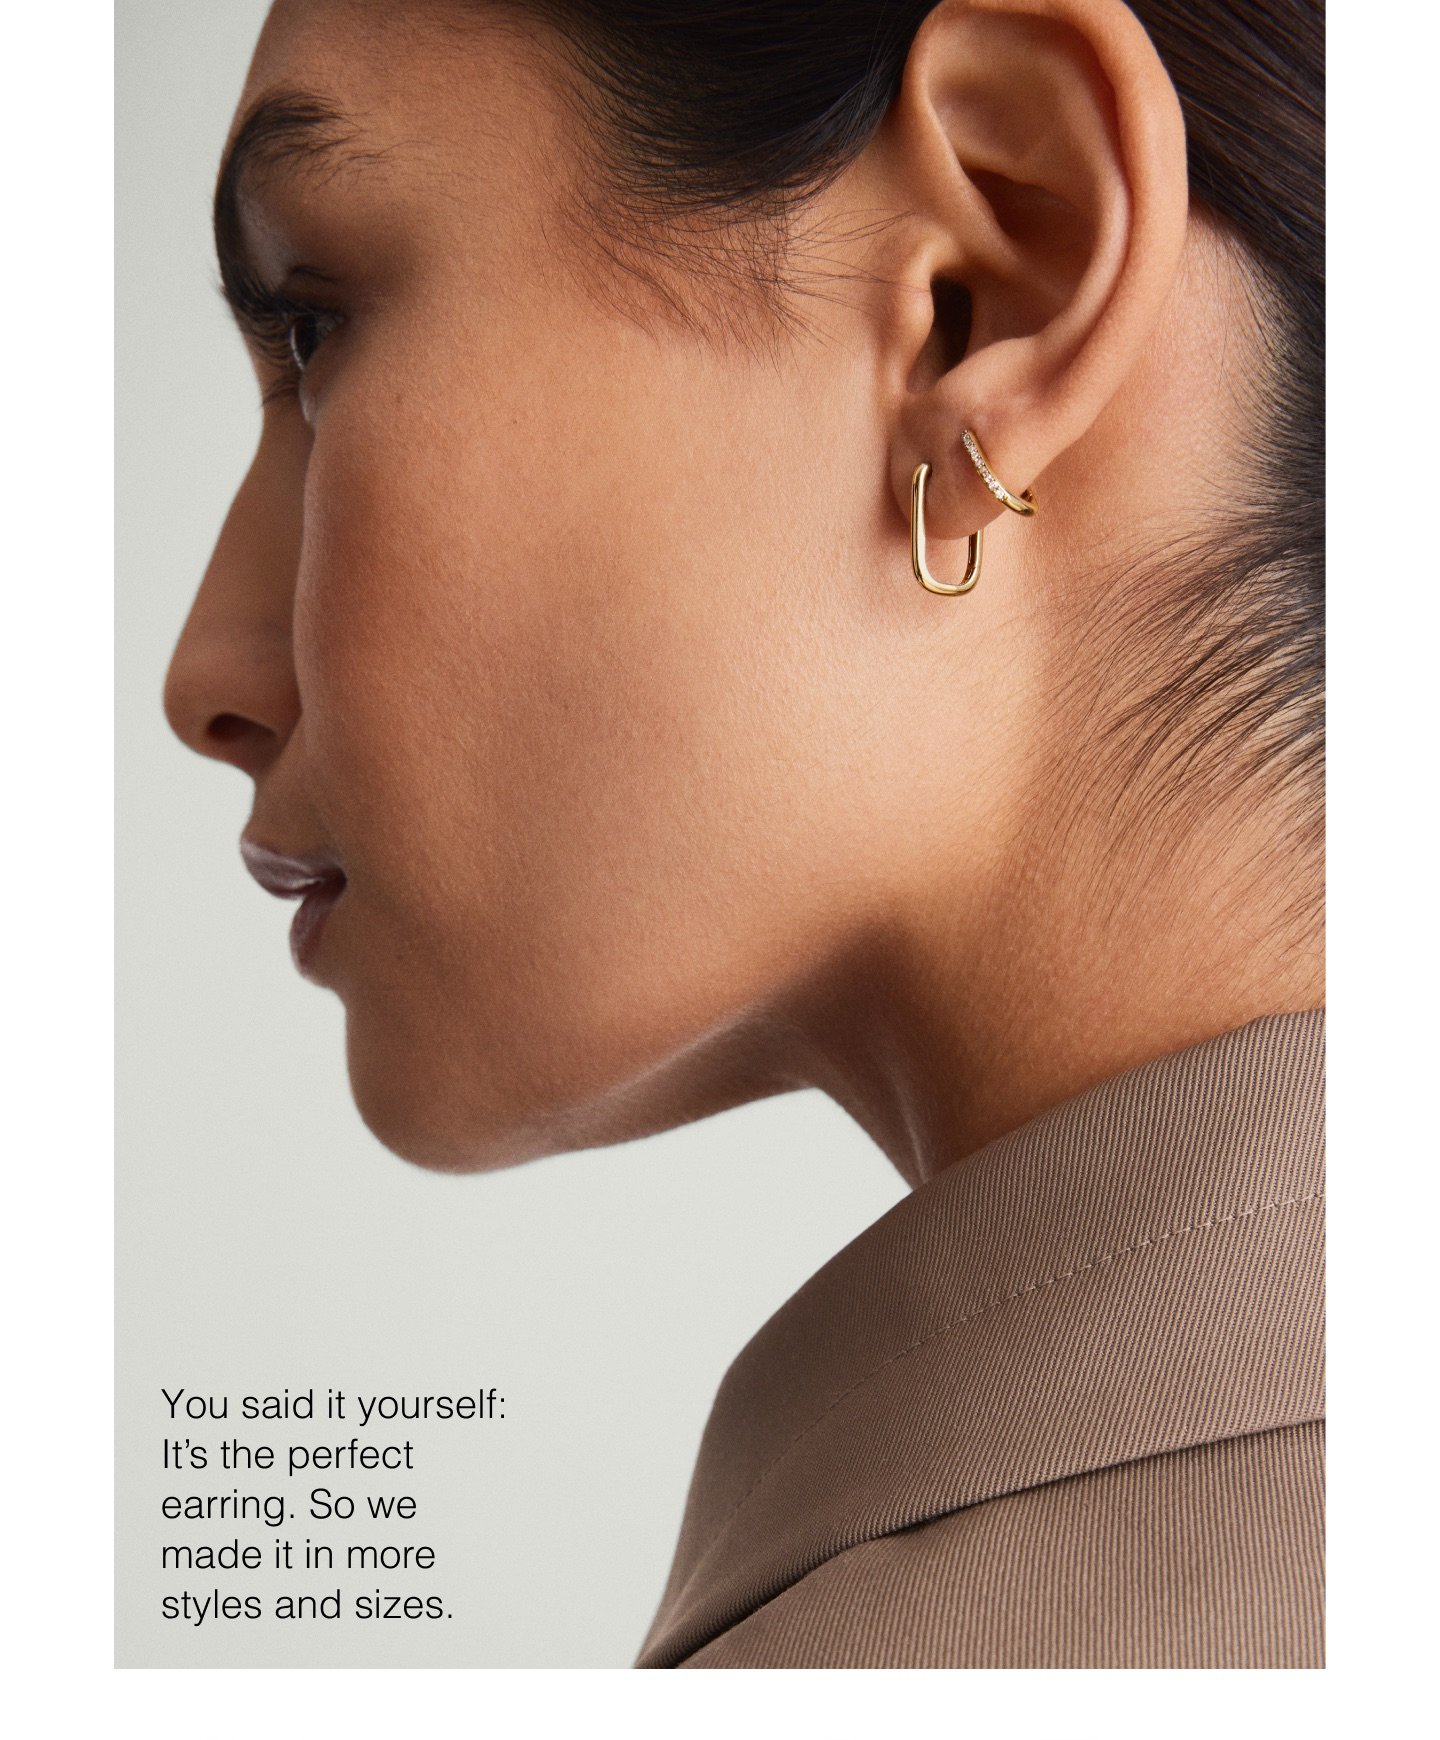 You said it yourself: It's the perfect earring. So we made it in more styles and sizes.